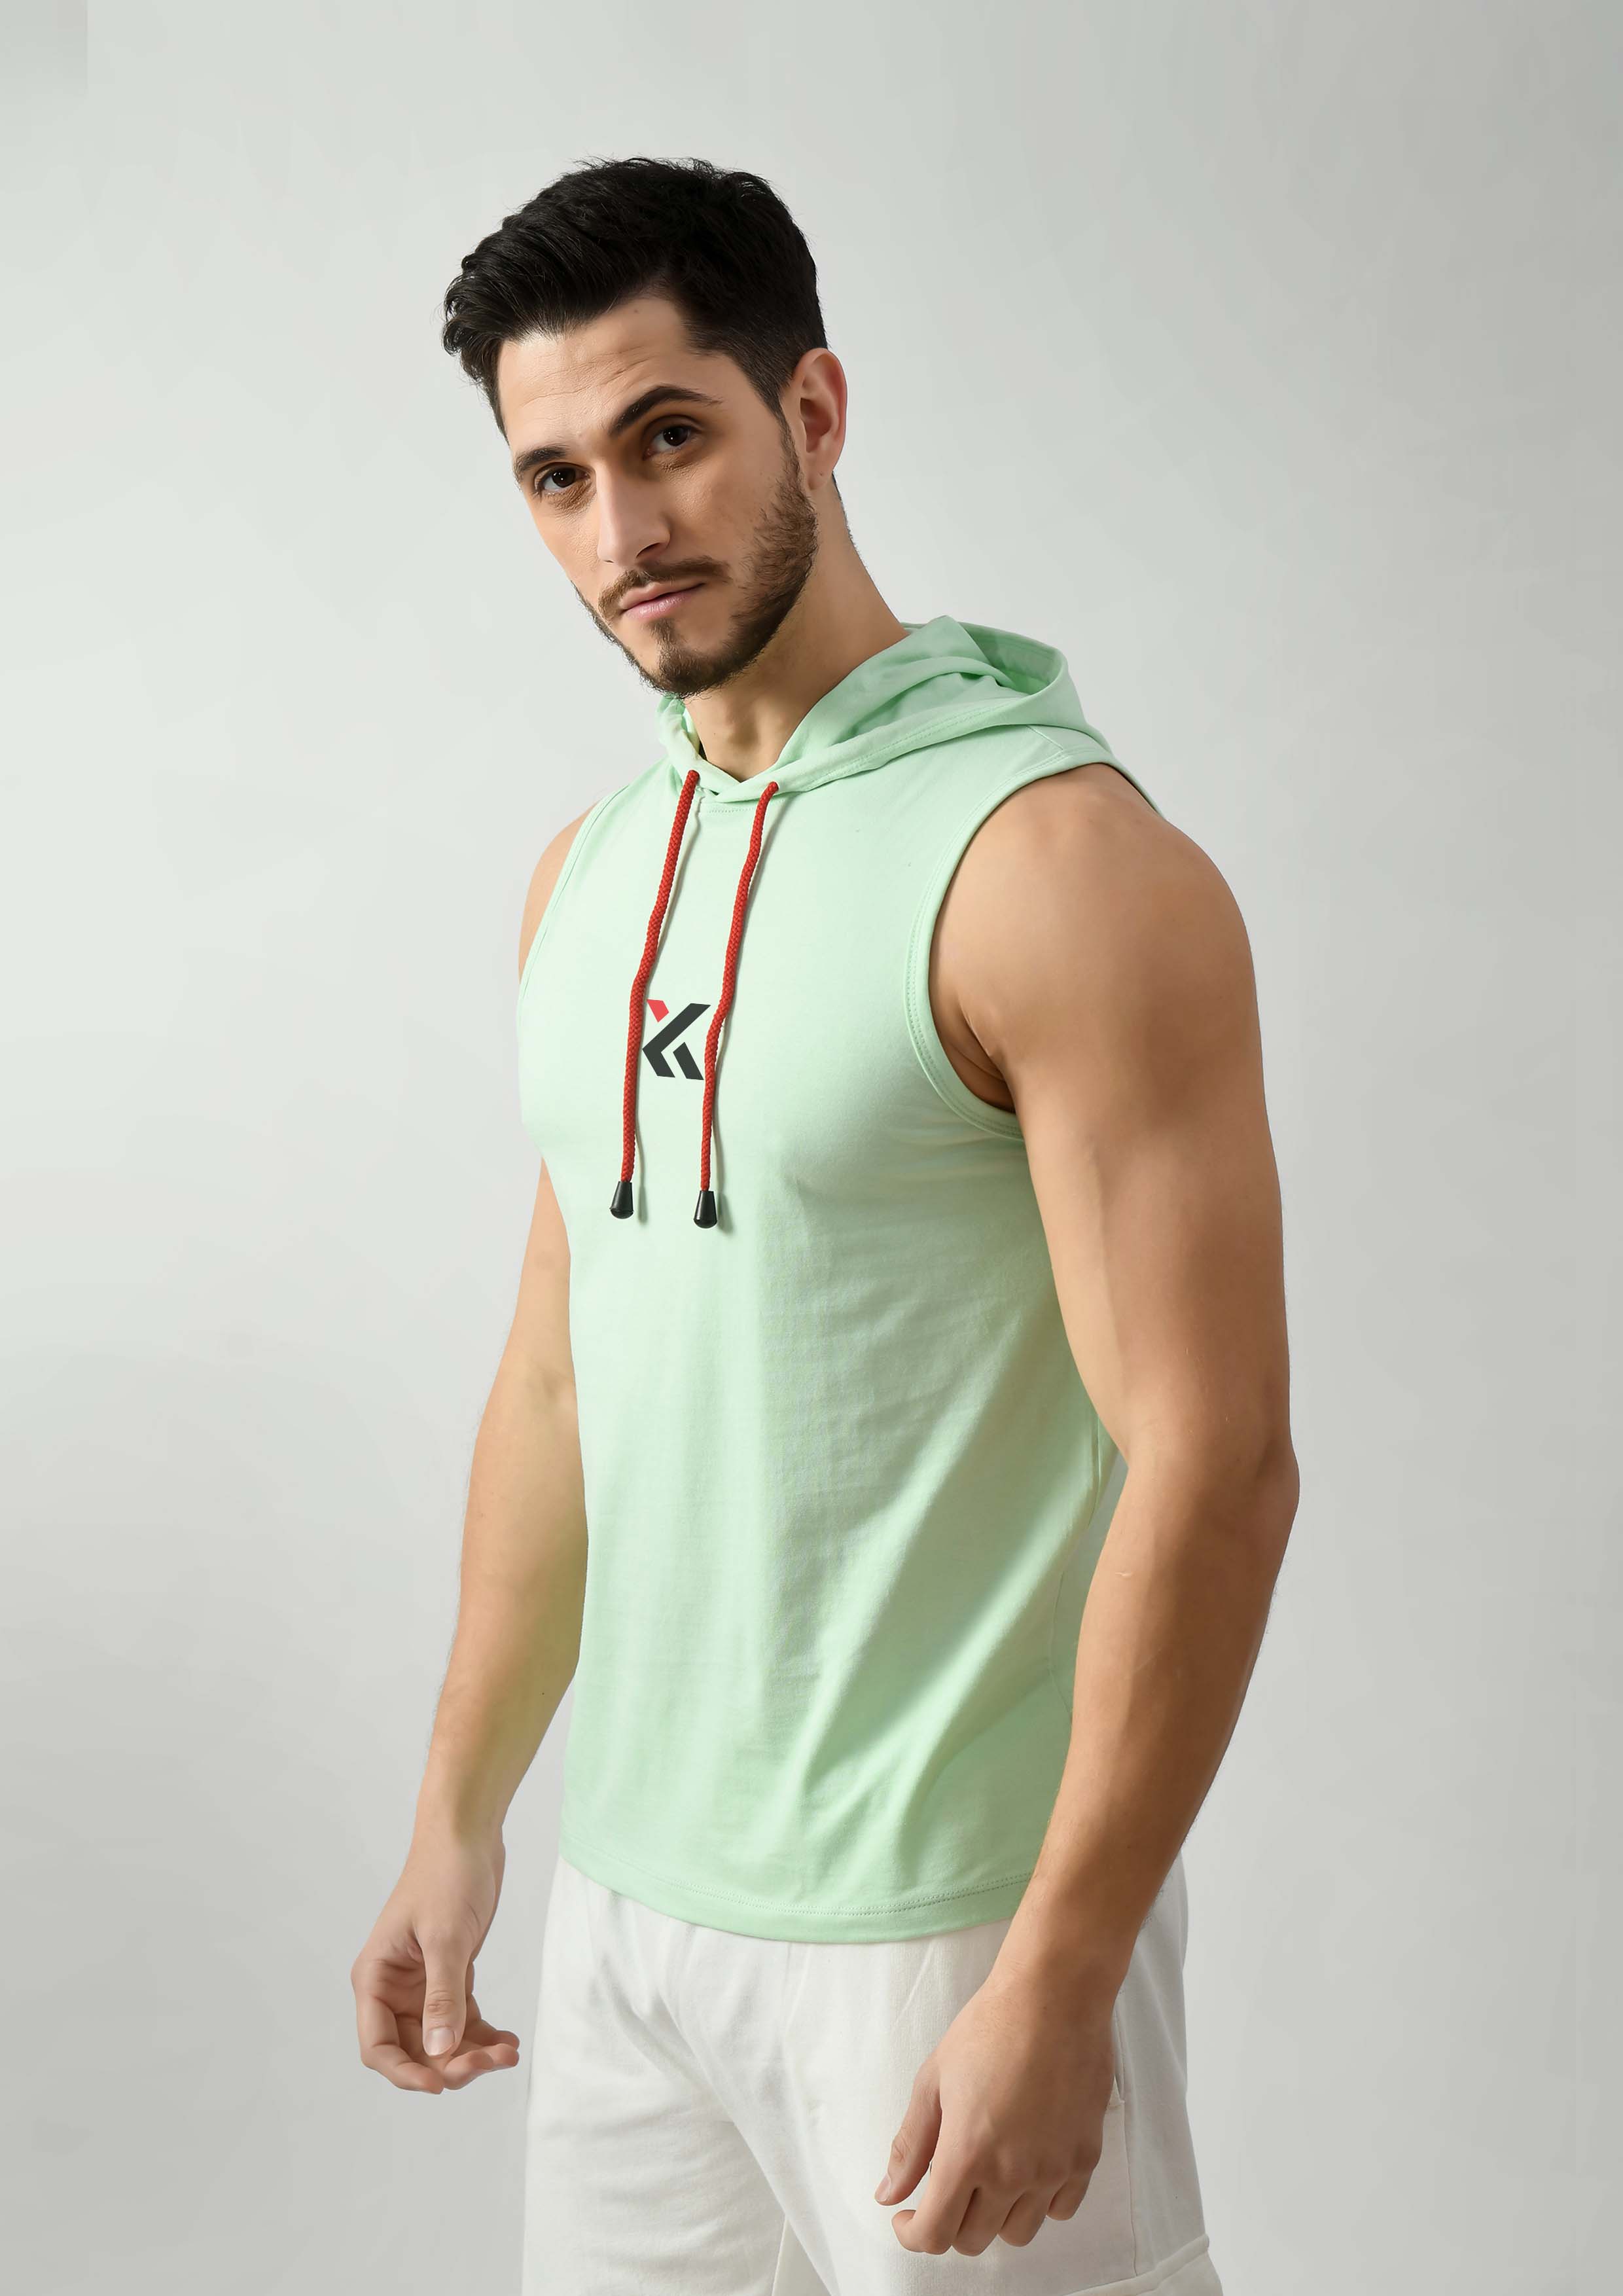 Celadon Green Tank Top for Men with Hoodie